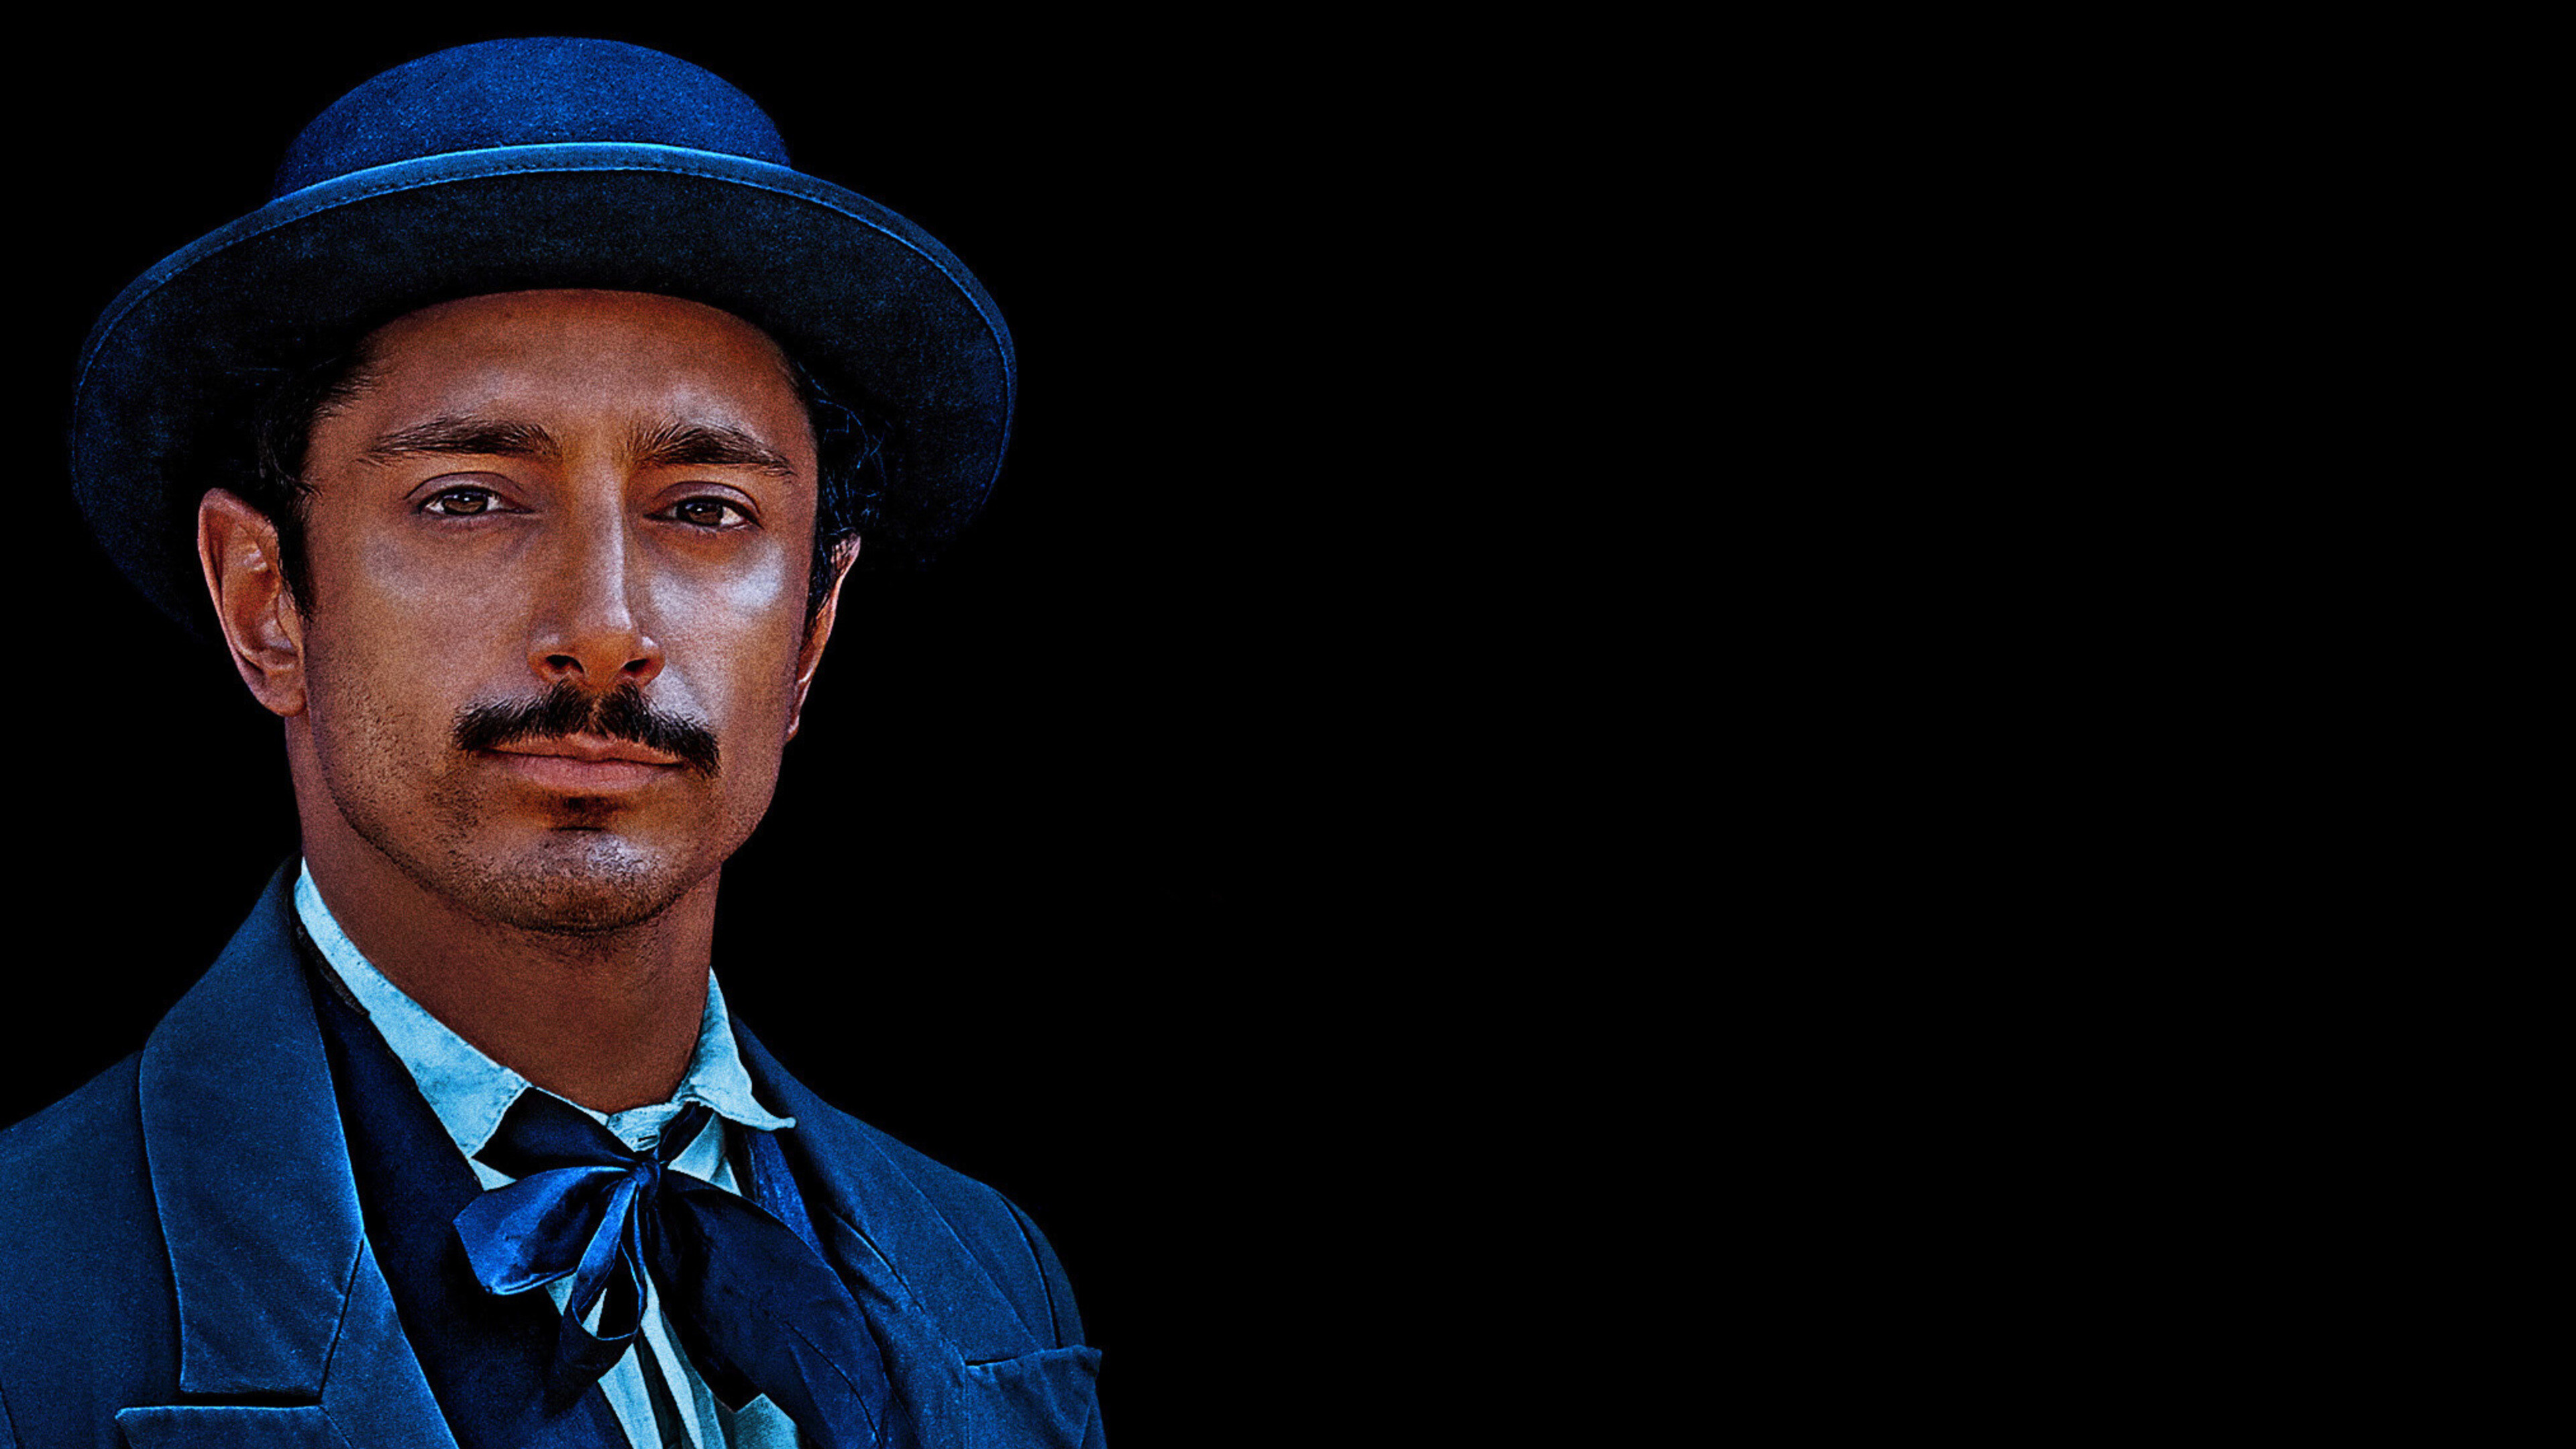 The Sisters Brothers: Riz Ahmed as Hermann Kermit Warm In 2018 Western film directed by Jacques Audiard. 3840x2160 4K Wallpaper.